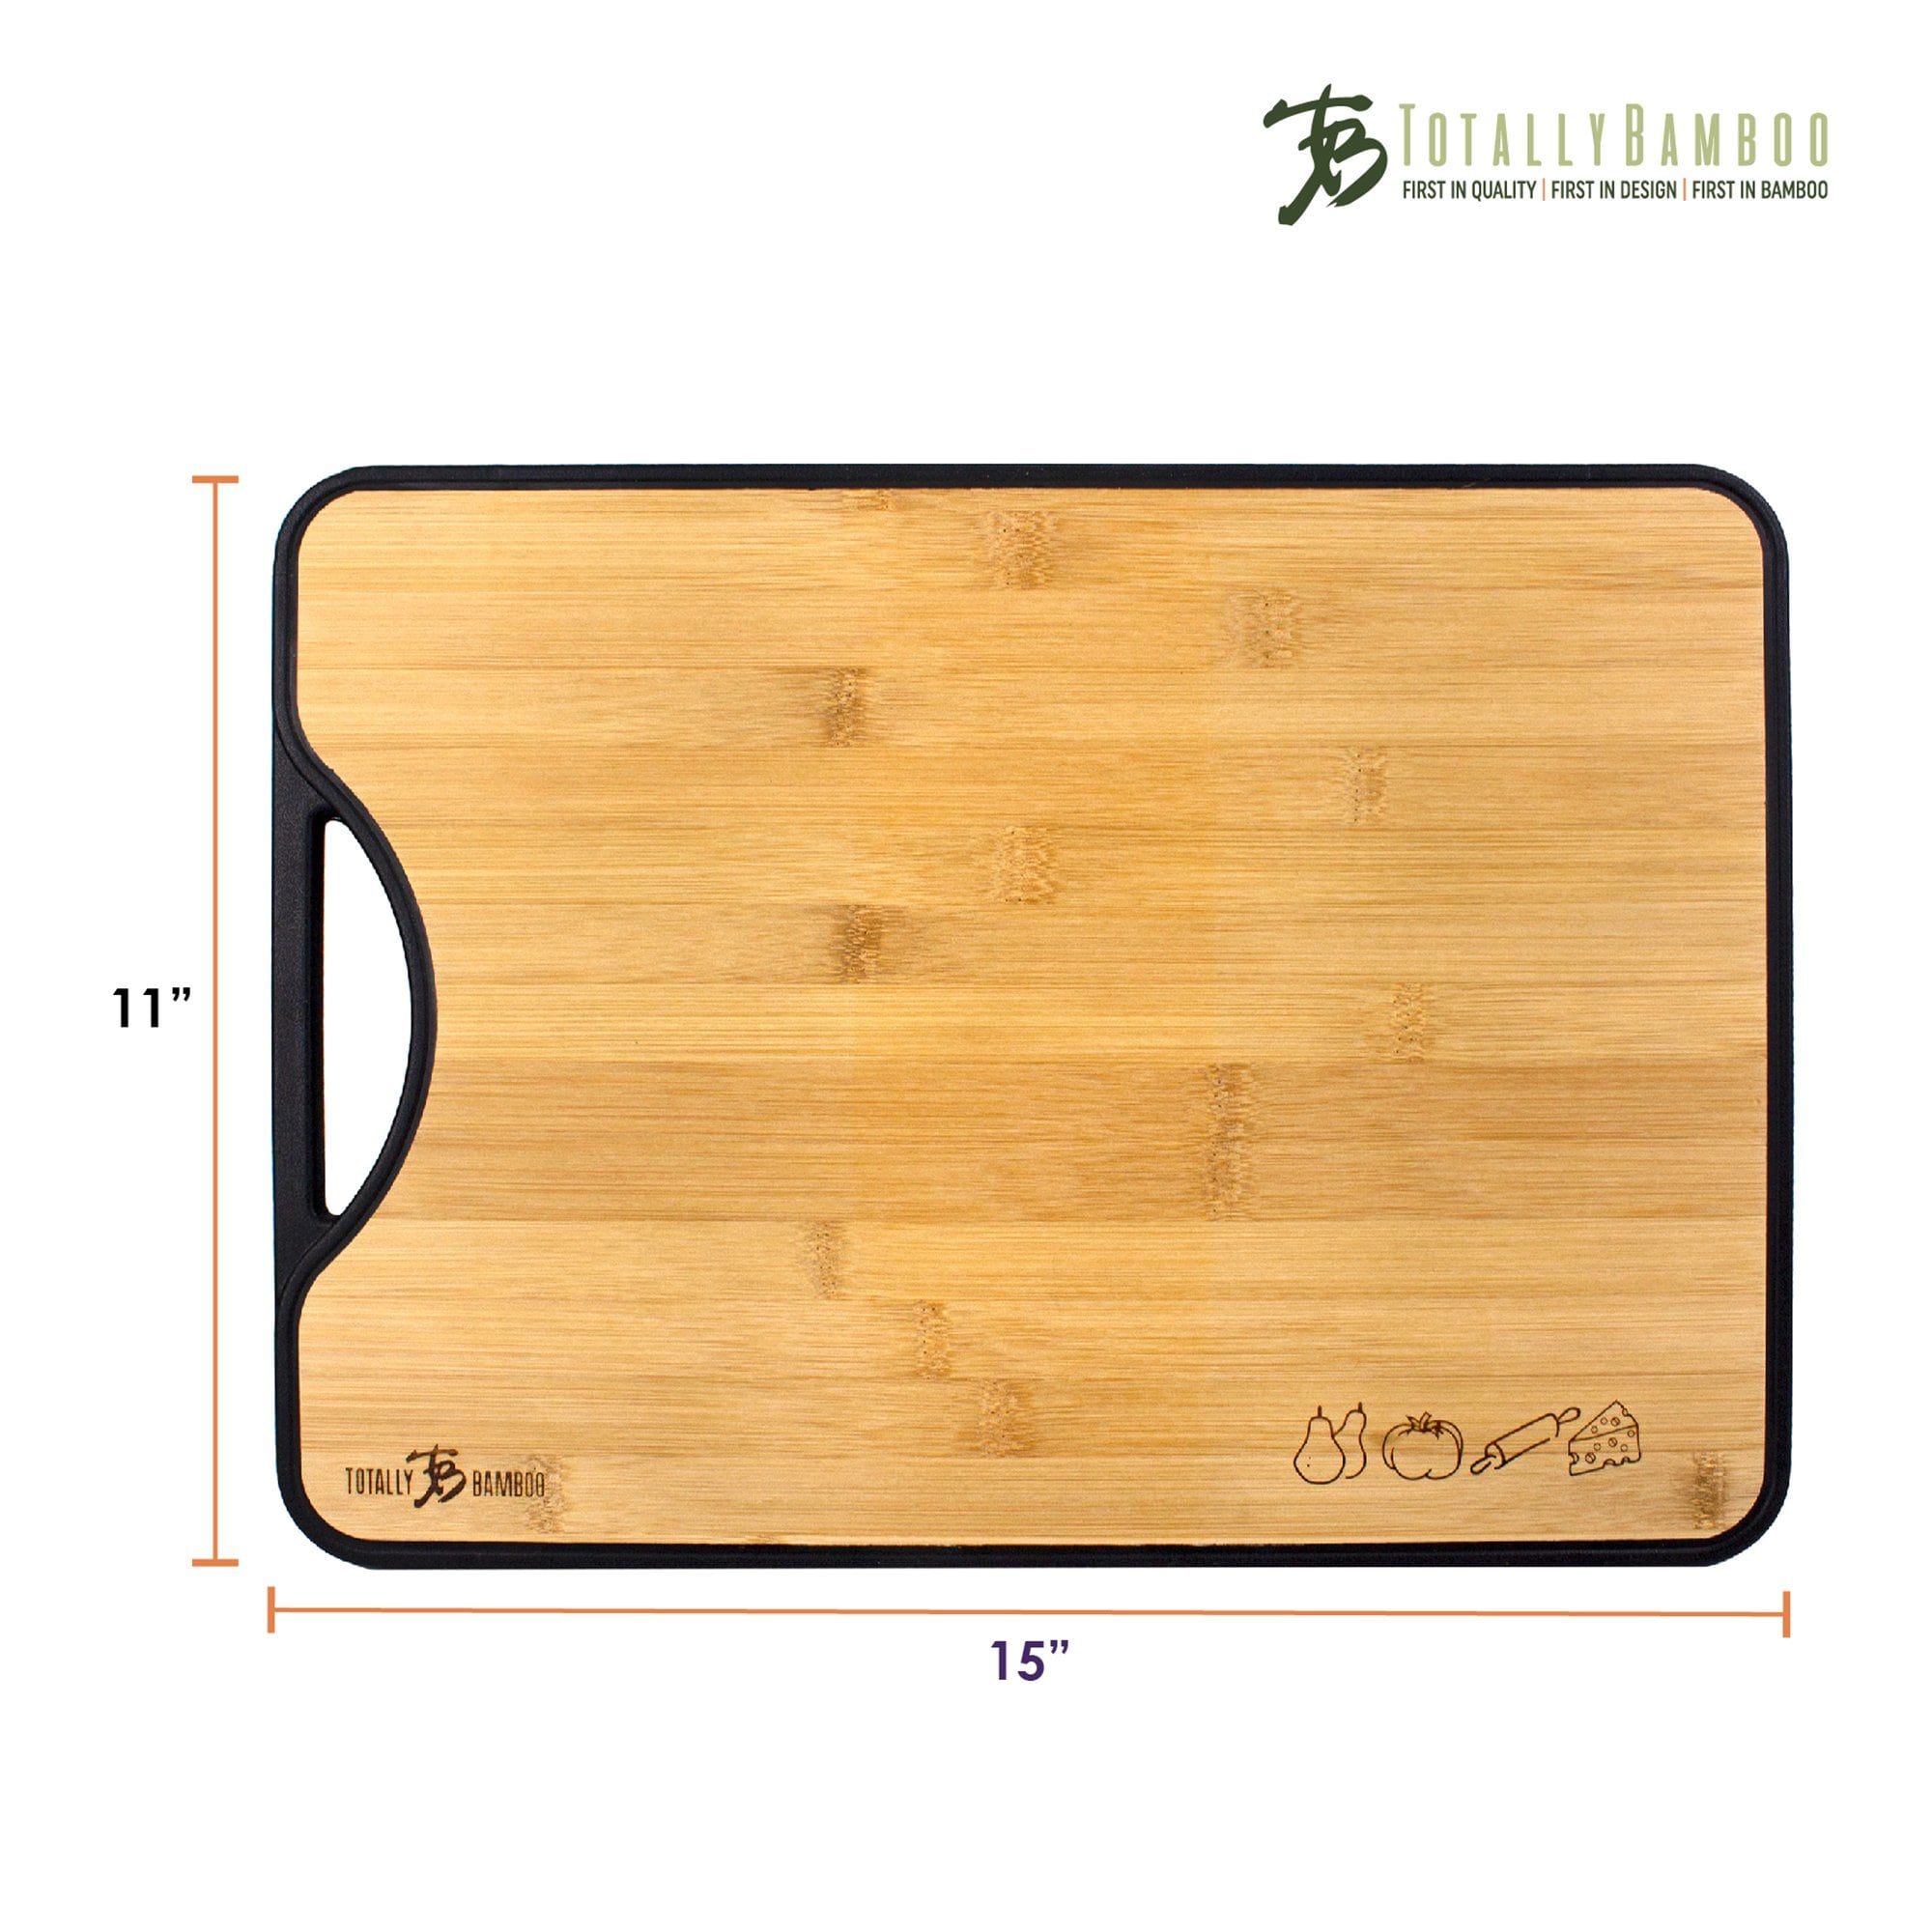 https://totallybamboo.com/cdn/shop/products/poly-boo-reversible-bamboo-and-poly-cutting-board-15-x-11-totally-bamboo-635143.jpg?v=1624420358